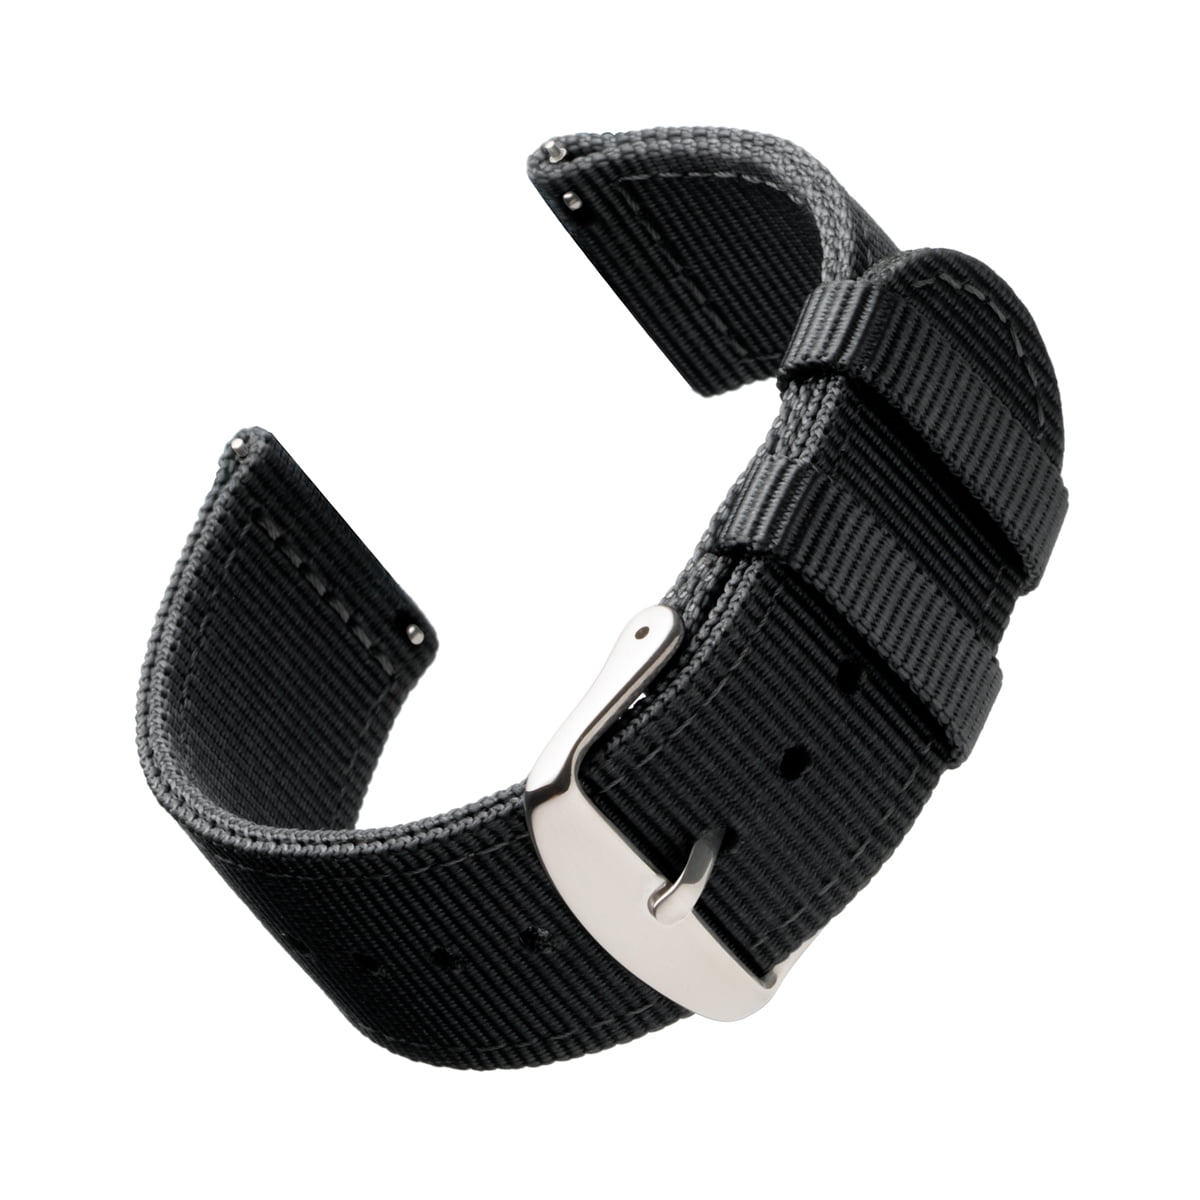 Black and Green Band Strap with Quick Release Pins for Fossil Q Founder 2.0 